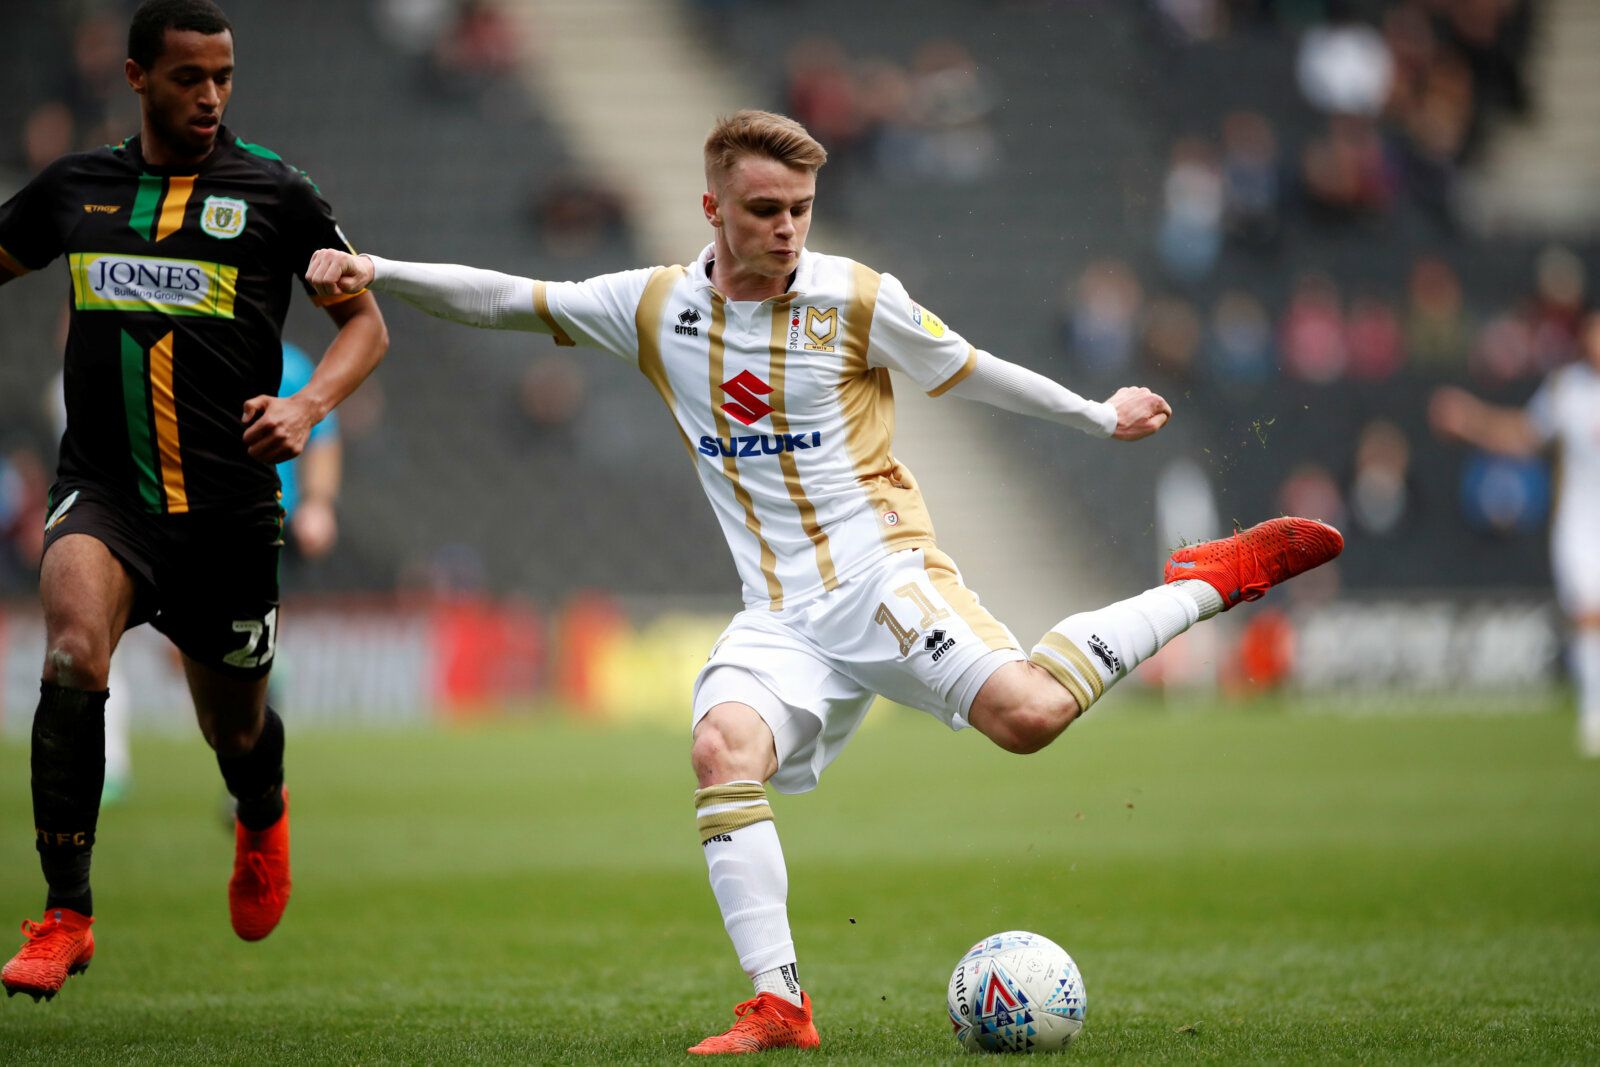 Soccer Football - League Two - Milton Keynes Dons v Yeovil Town - Stadium MK, Milton Keynes, Britain - March 23, 2019   Milton Keynes Dons' Jake Hesketh in action during the match    Action Images/Andrew Boyers    EDITORIAL USE ONLY. No use with unauthorized audio, video, data, fixture lists, club/league logos or 